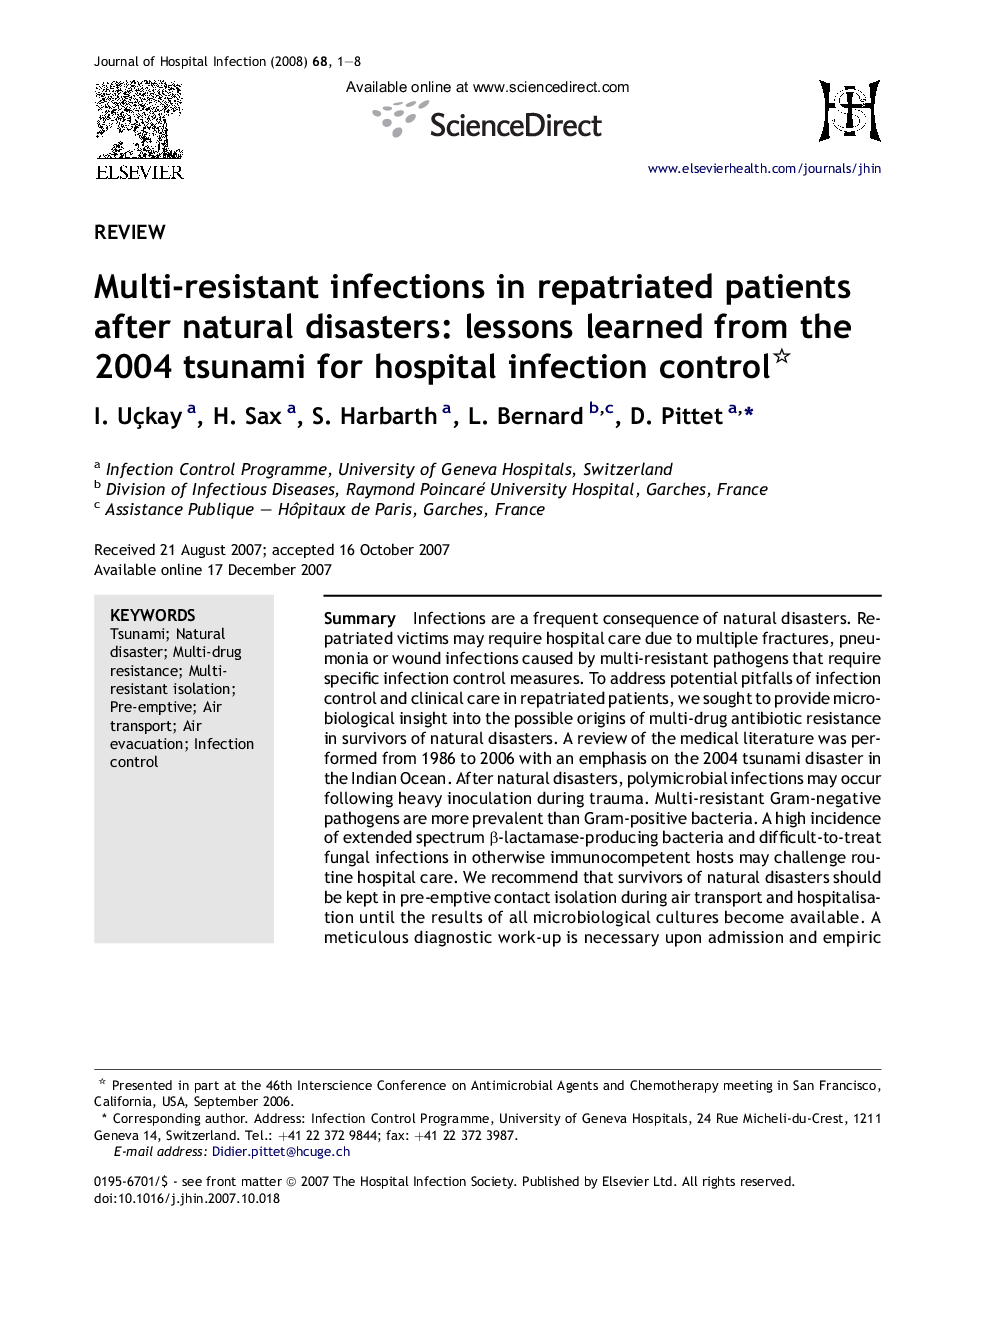 Multi-resistant infections in repatriated patients after natural disasters: lessons learned from the 2004 tsunami for hospital infection control 